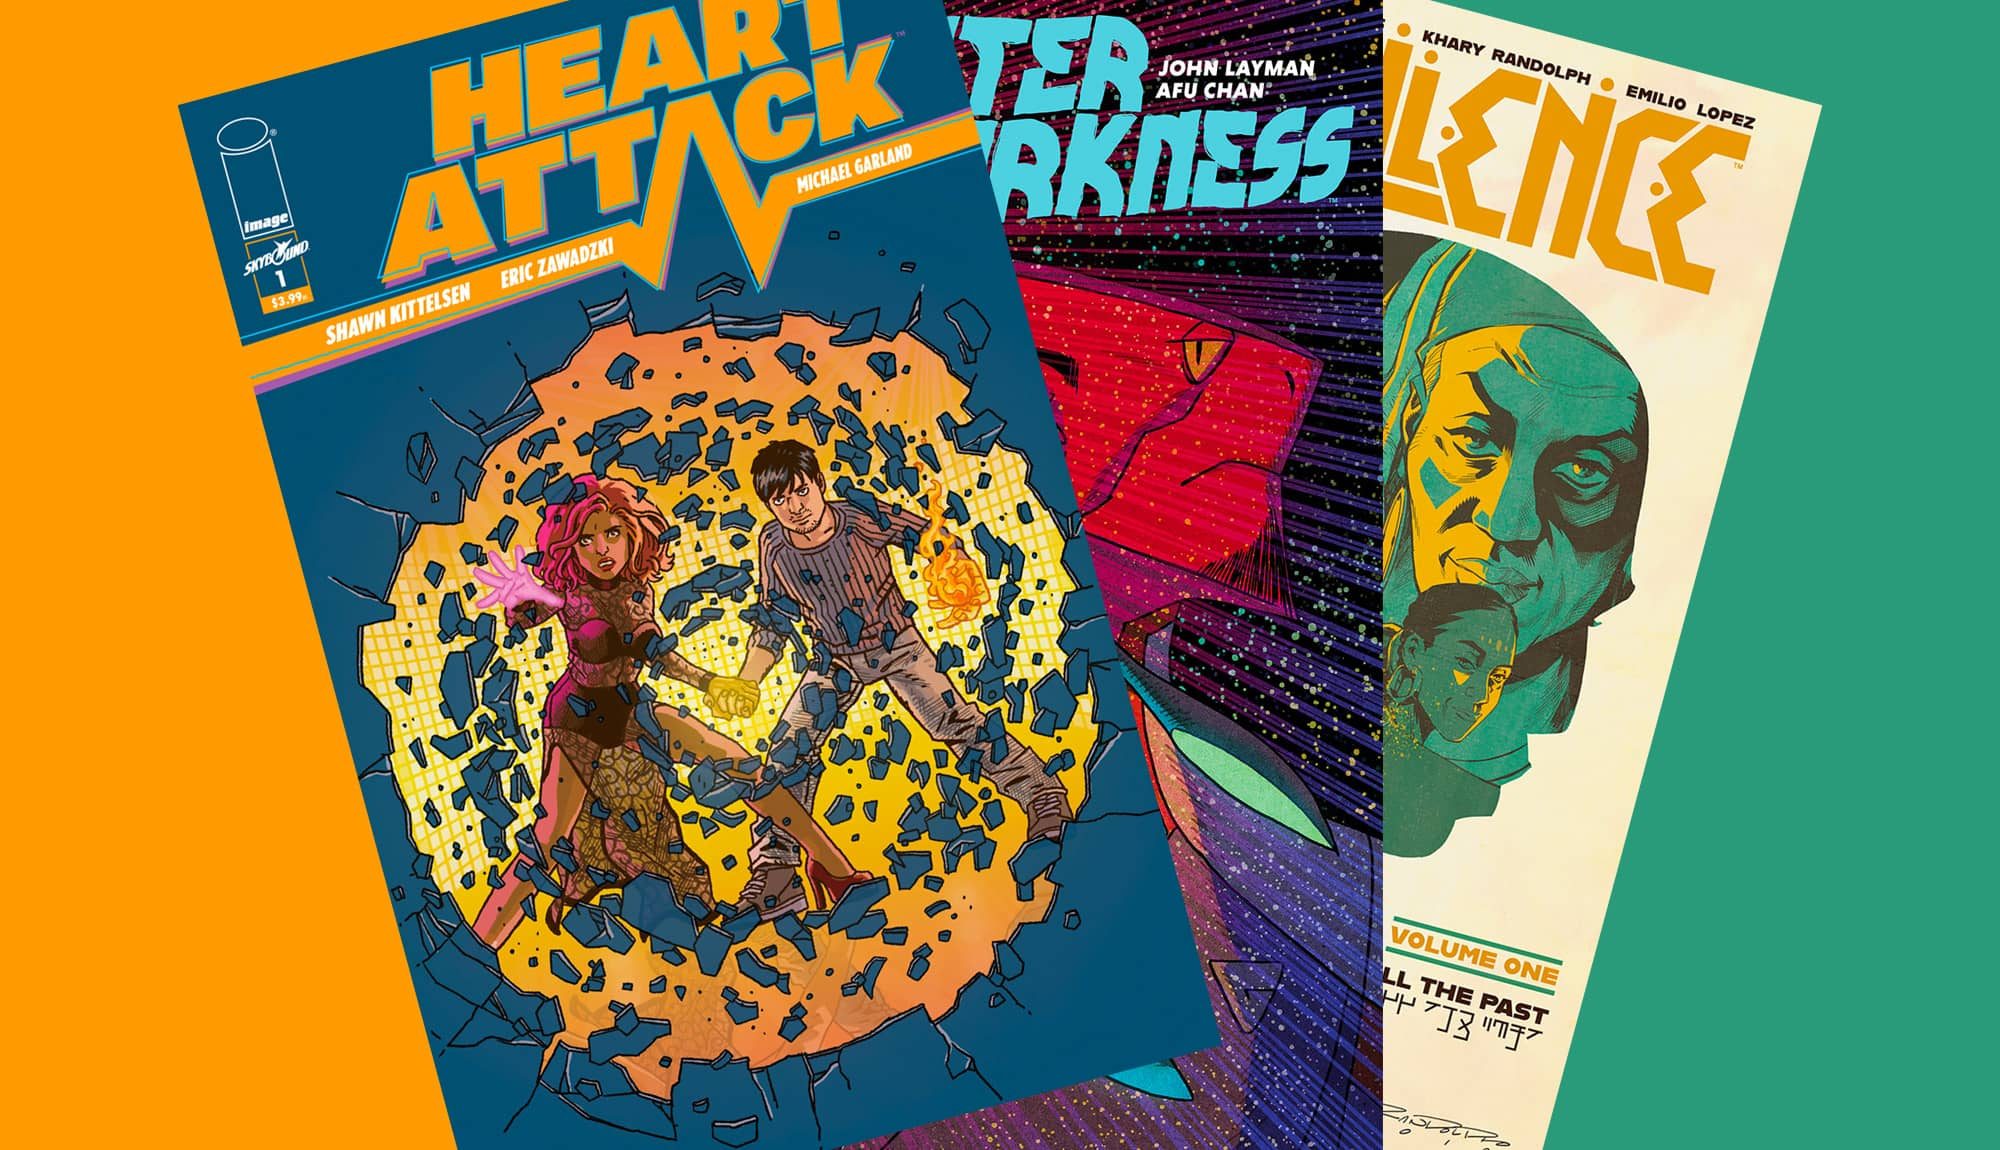 This Week’s Comics: HEART ATTACK, OUTER DARKNESS, & EXCELLENCE!